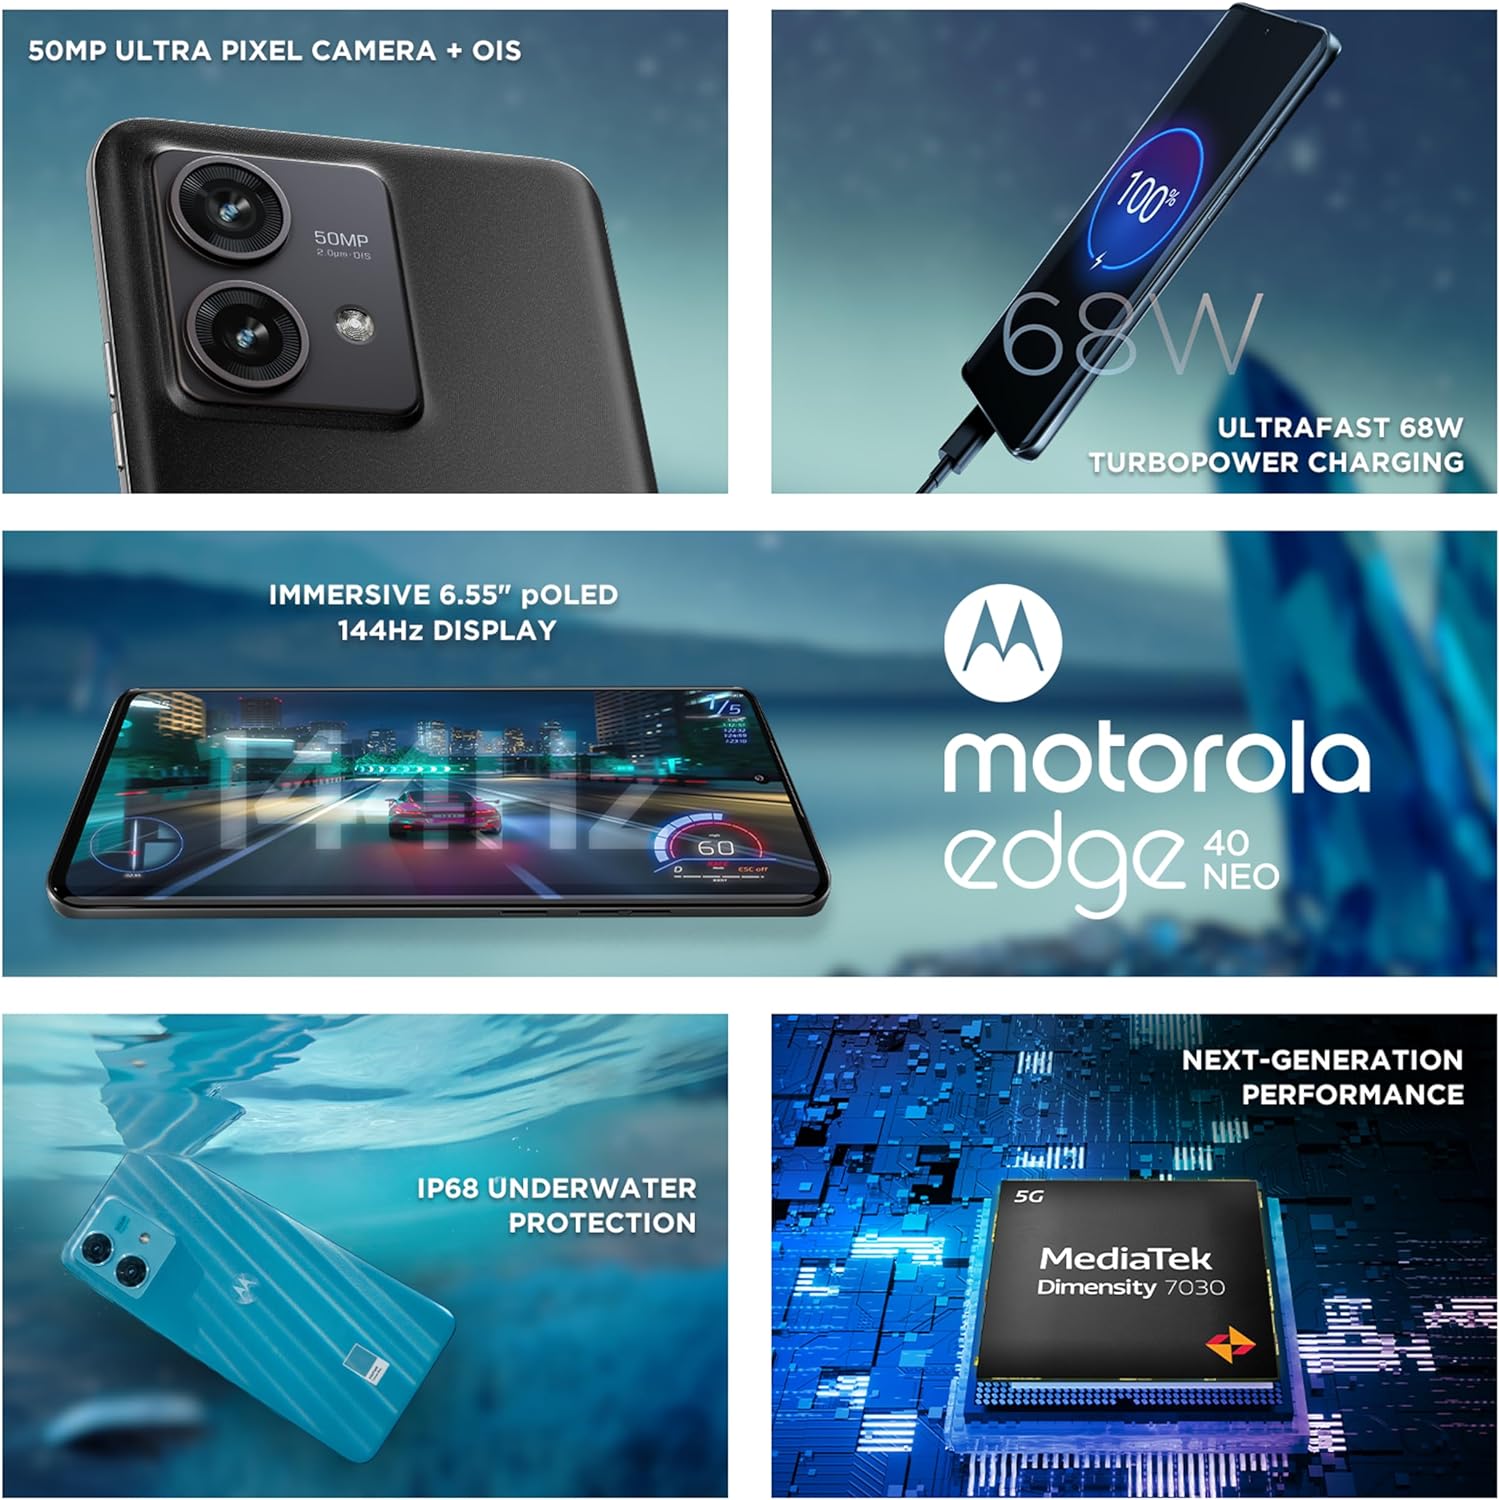 The image appears to be a collage of promotional graphics for a Motorola Edge 40 Neo. These graphics highlight various features of the Motorola Edge 40 Neo, as indicated by the logo seen in the middle right graphic. The features advertised in the image are:
1. Top left: 50MP Ultra Pixel Camera + OIS (Optical Image Stabilization) – showcasing the phone's camera capabilities.
2. Top right: Ultrafast 68W TurboPower Charging – emphasizing the phone's fast charging technology.